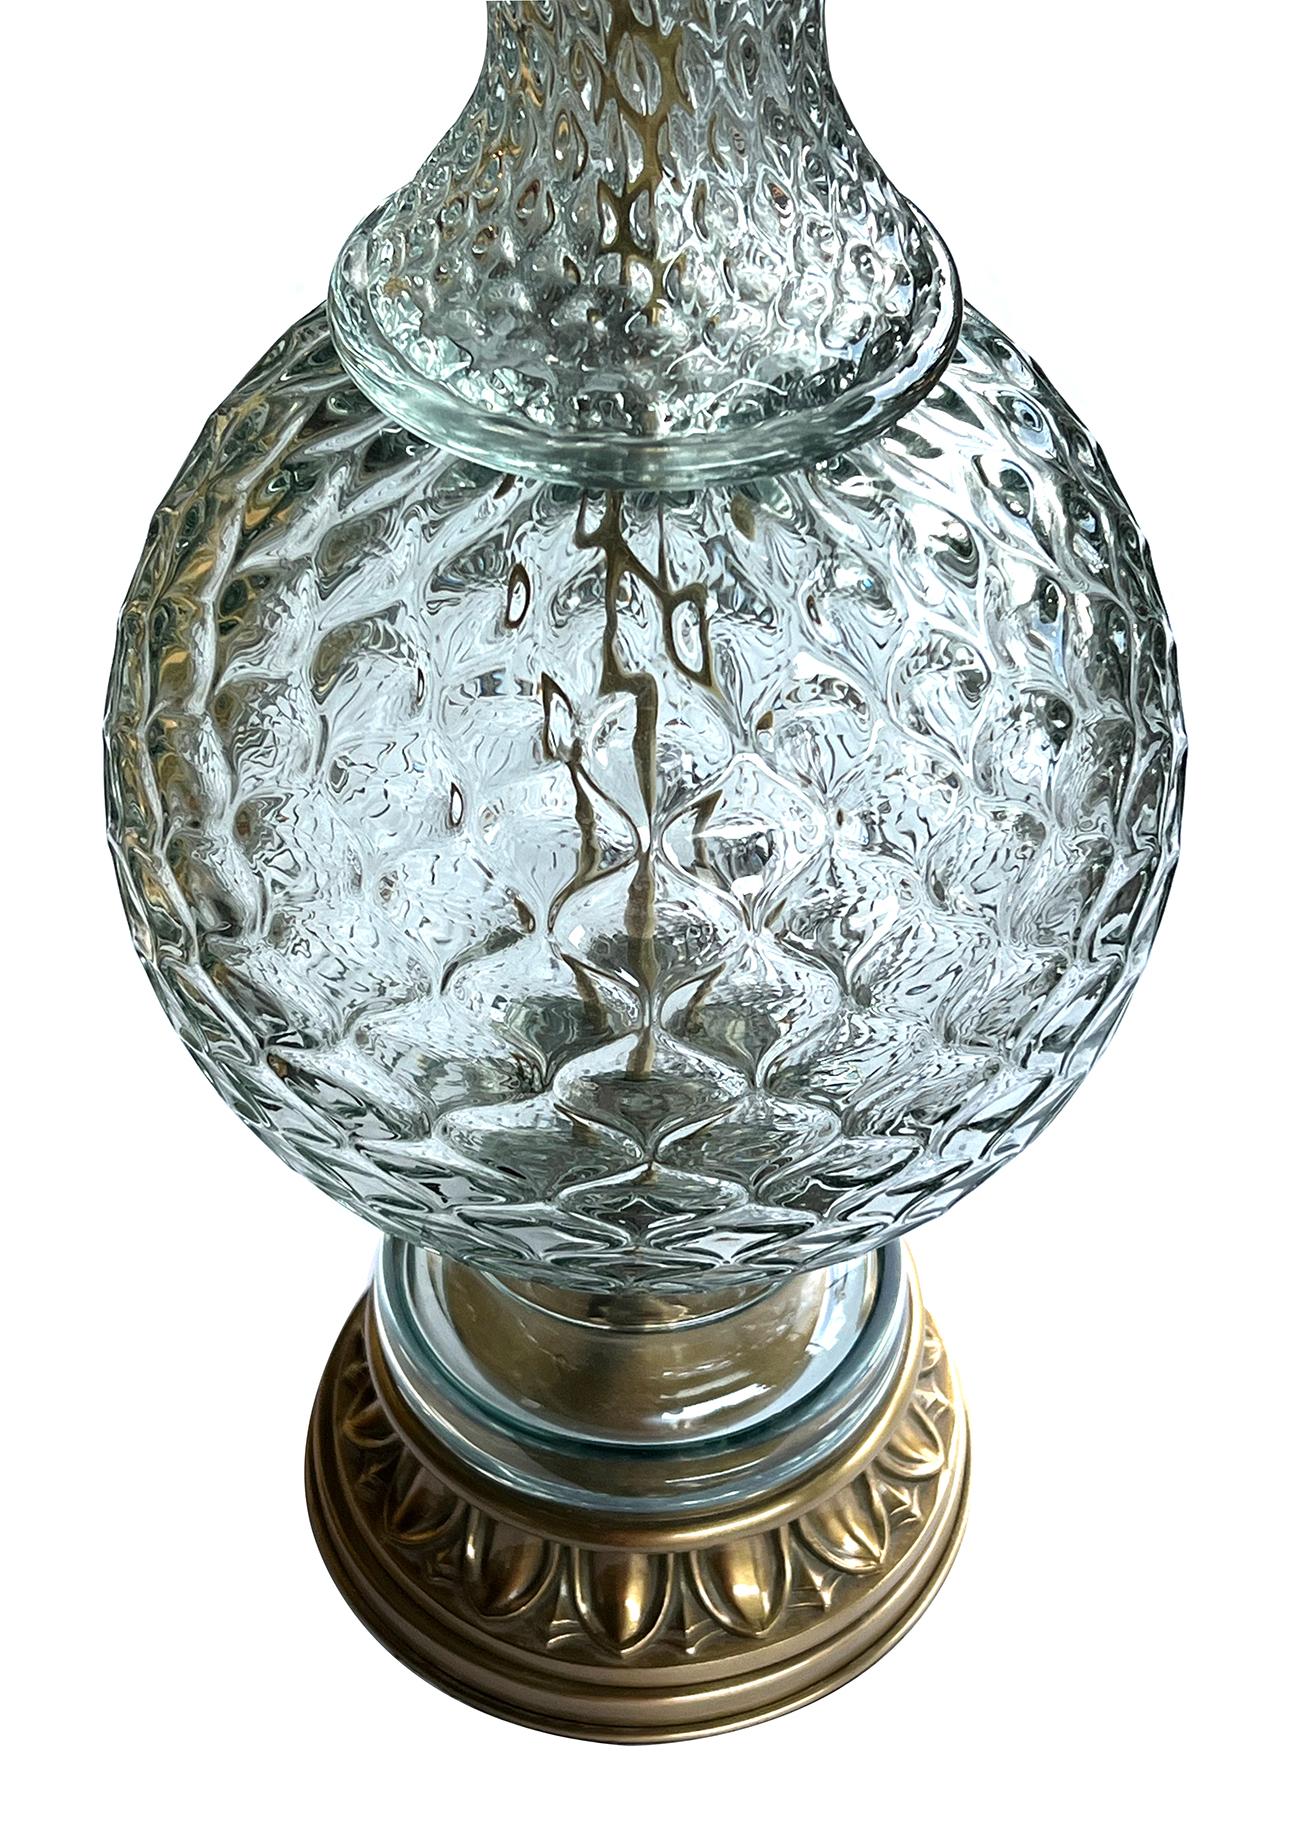 the large and heavy hand-blown baluster-form lamp with textured surface; the waisted neck collar above a spheroid body; all resting on an egg-and-dart brass base; manufactured in Italy for the Marbro lighting company